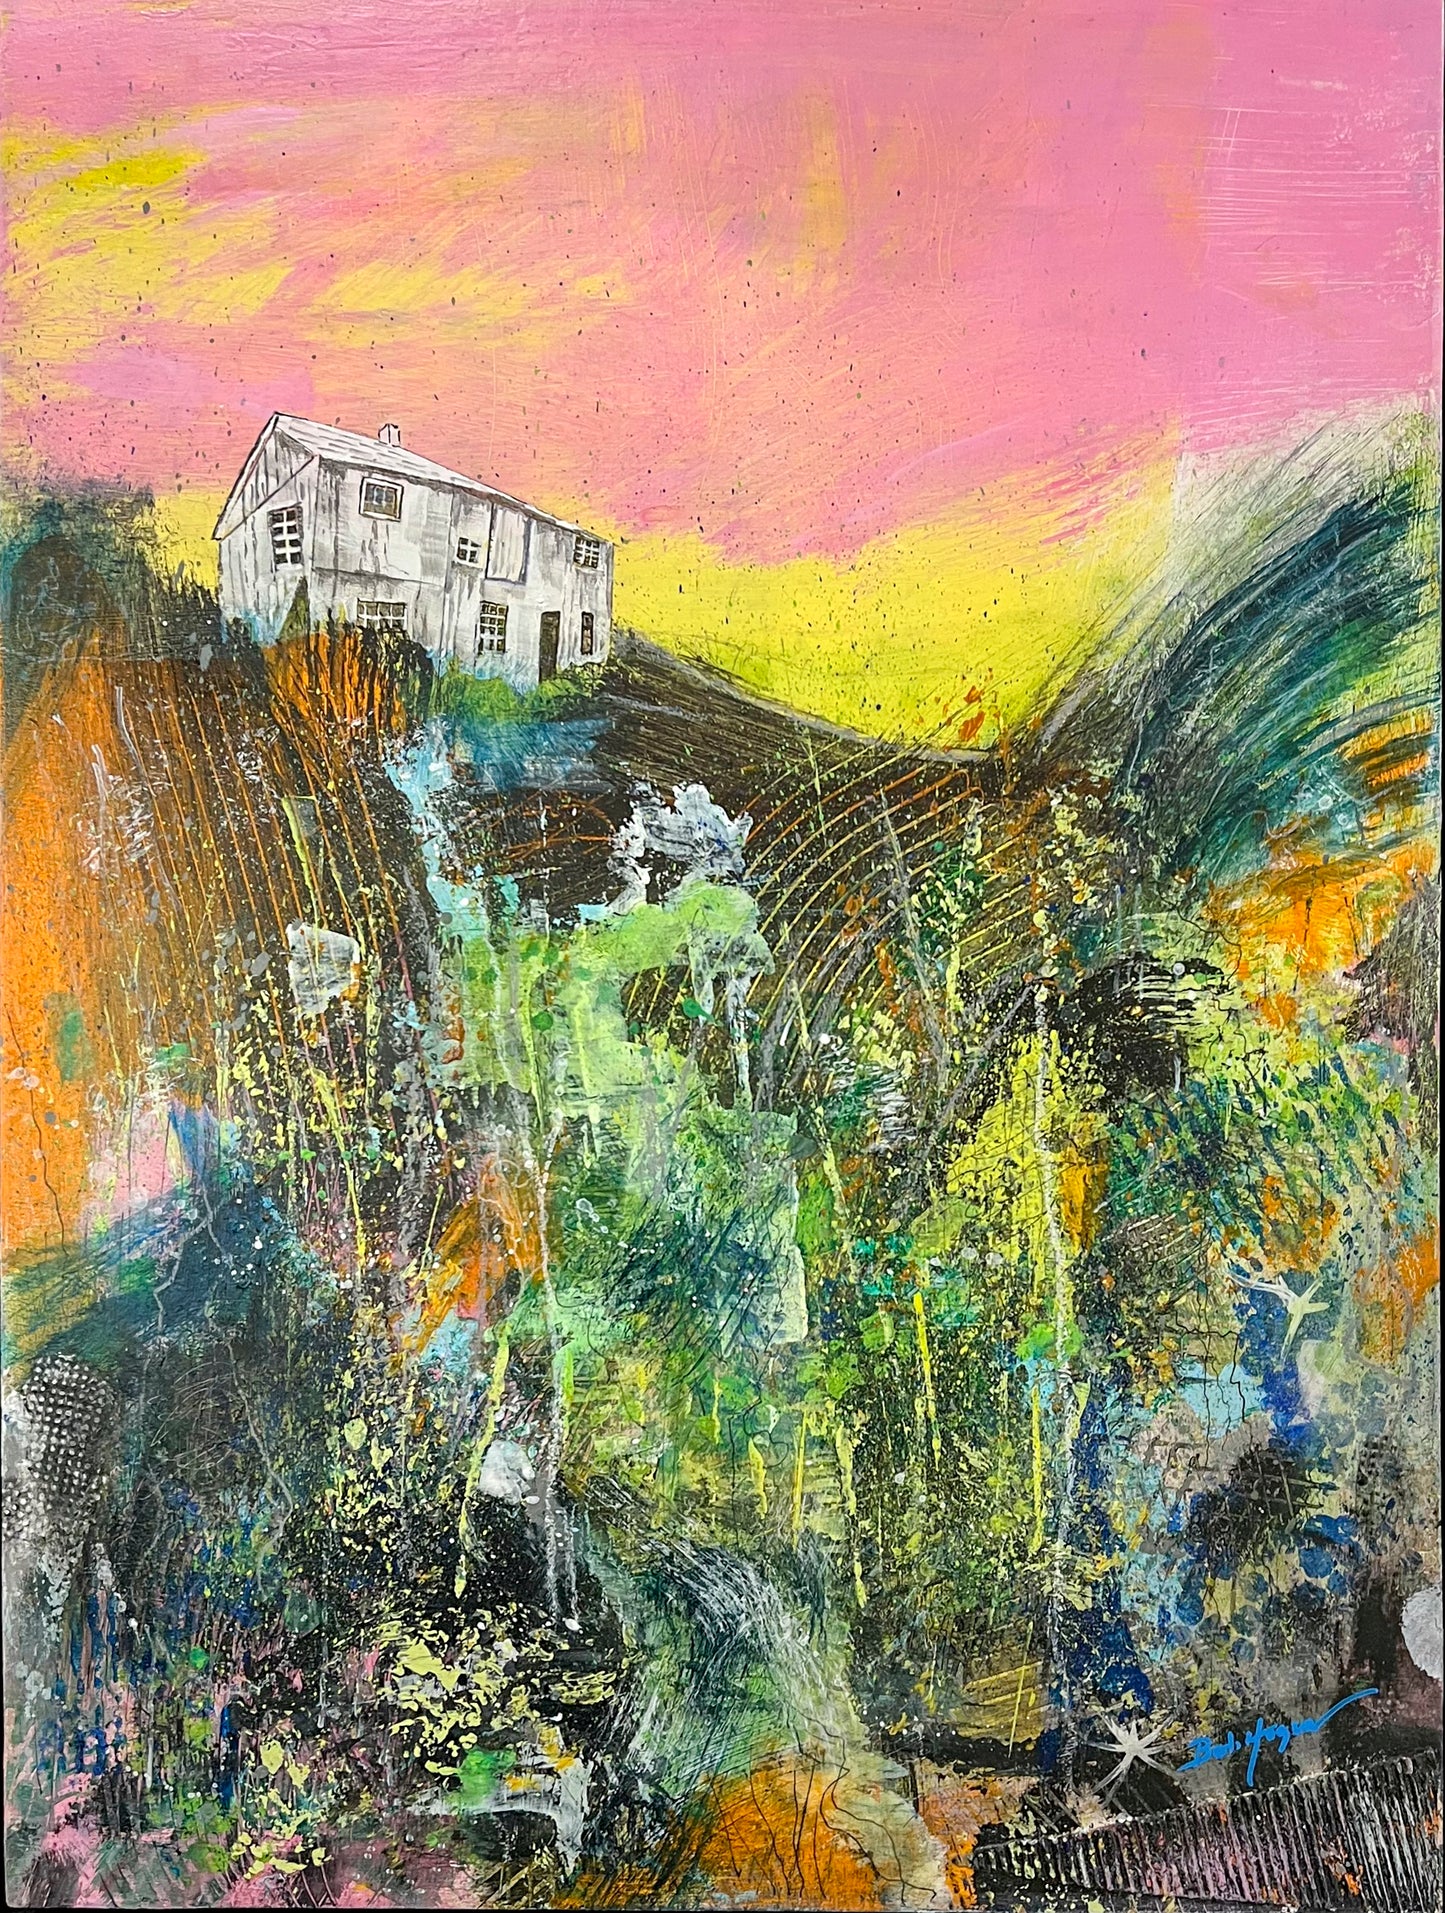 Abstract acrylic work shows a white house on the edge of a cliff at sunrise. Colors of brown, green, grey and white create an image of the side of the cliff; artist Bob Hogue; 18"Wx24"H